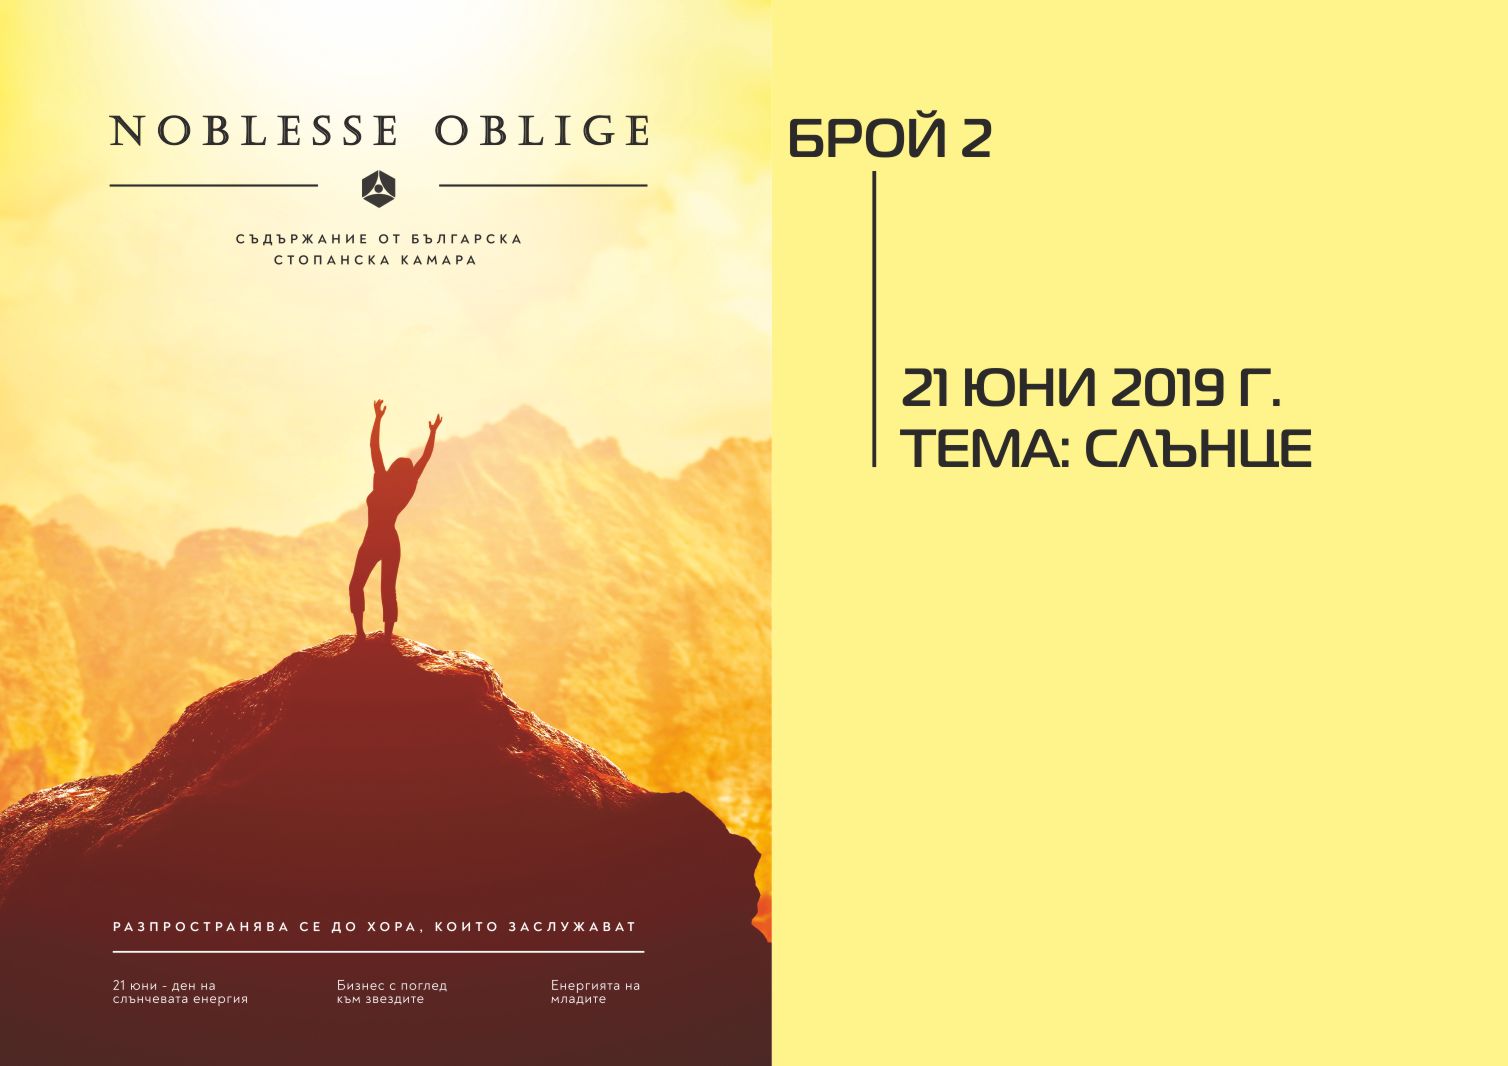 The second issue of BIA’s magazine “Noblesse Oblige” is here